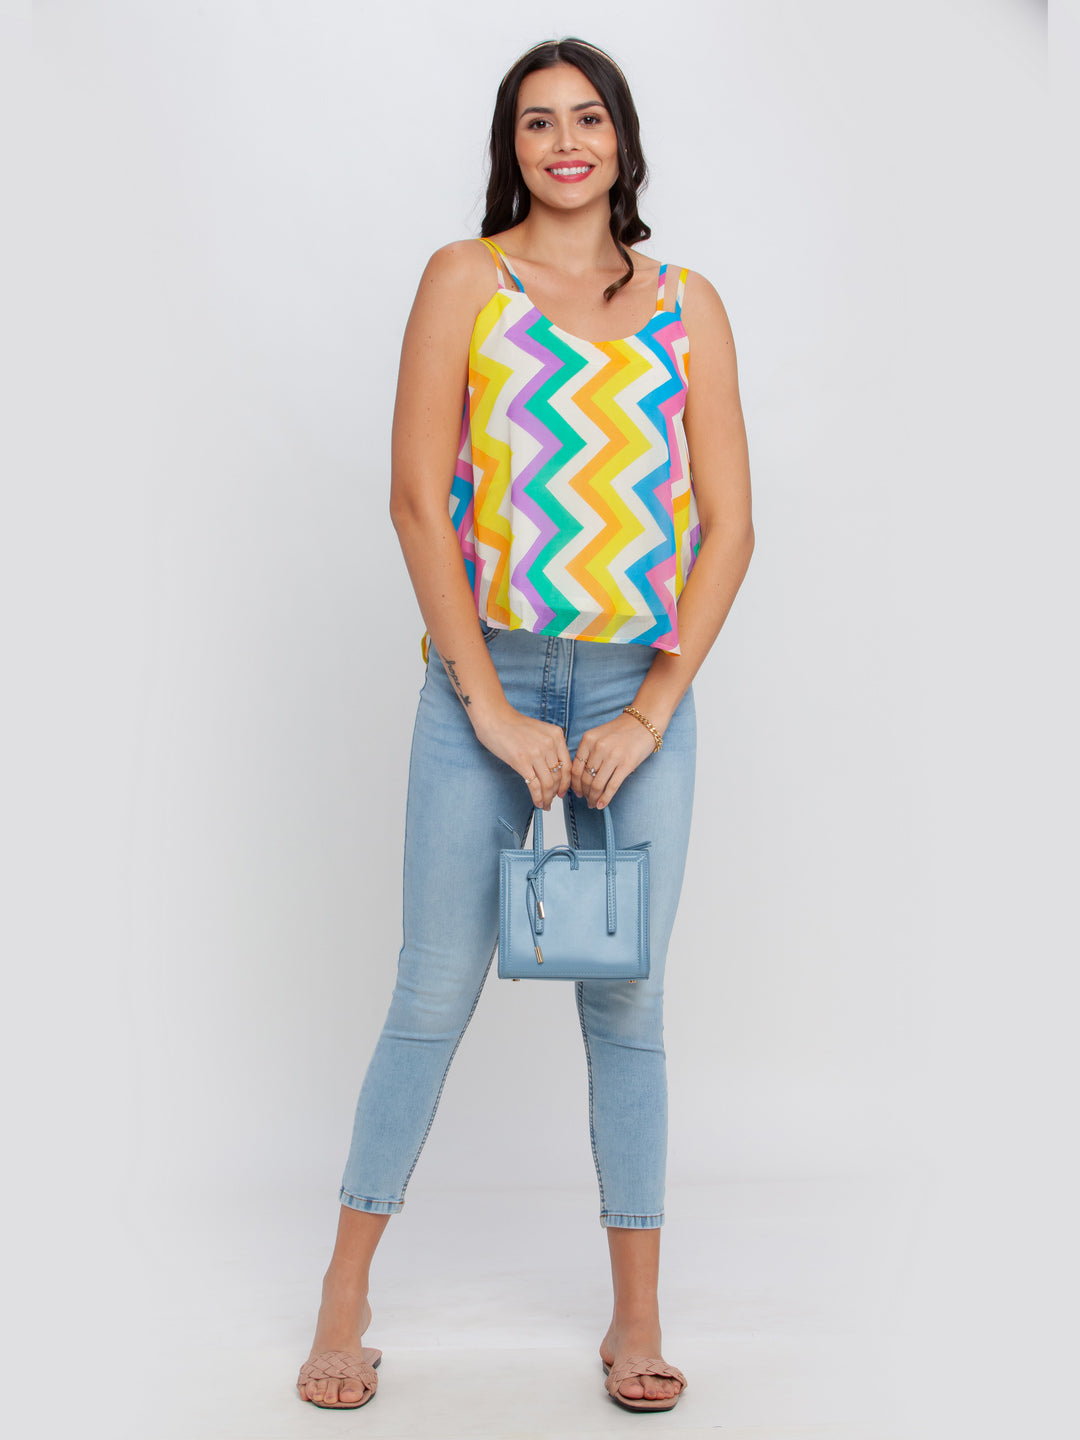 Multicolored Printed Strappy Top For Women